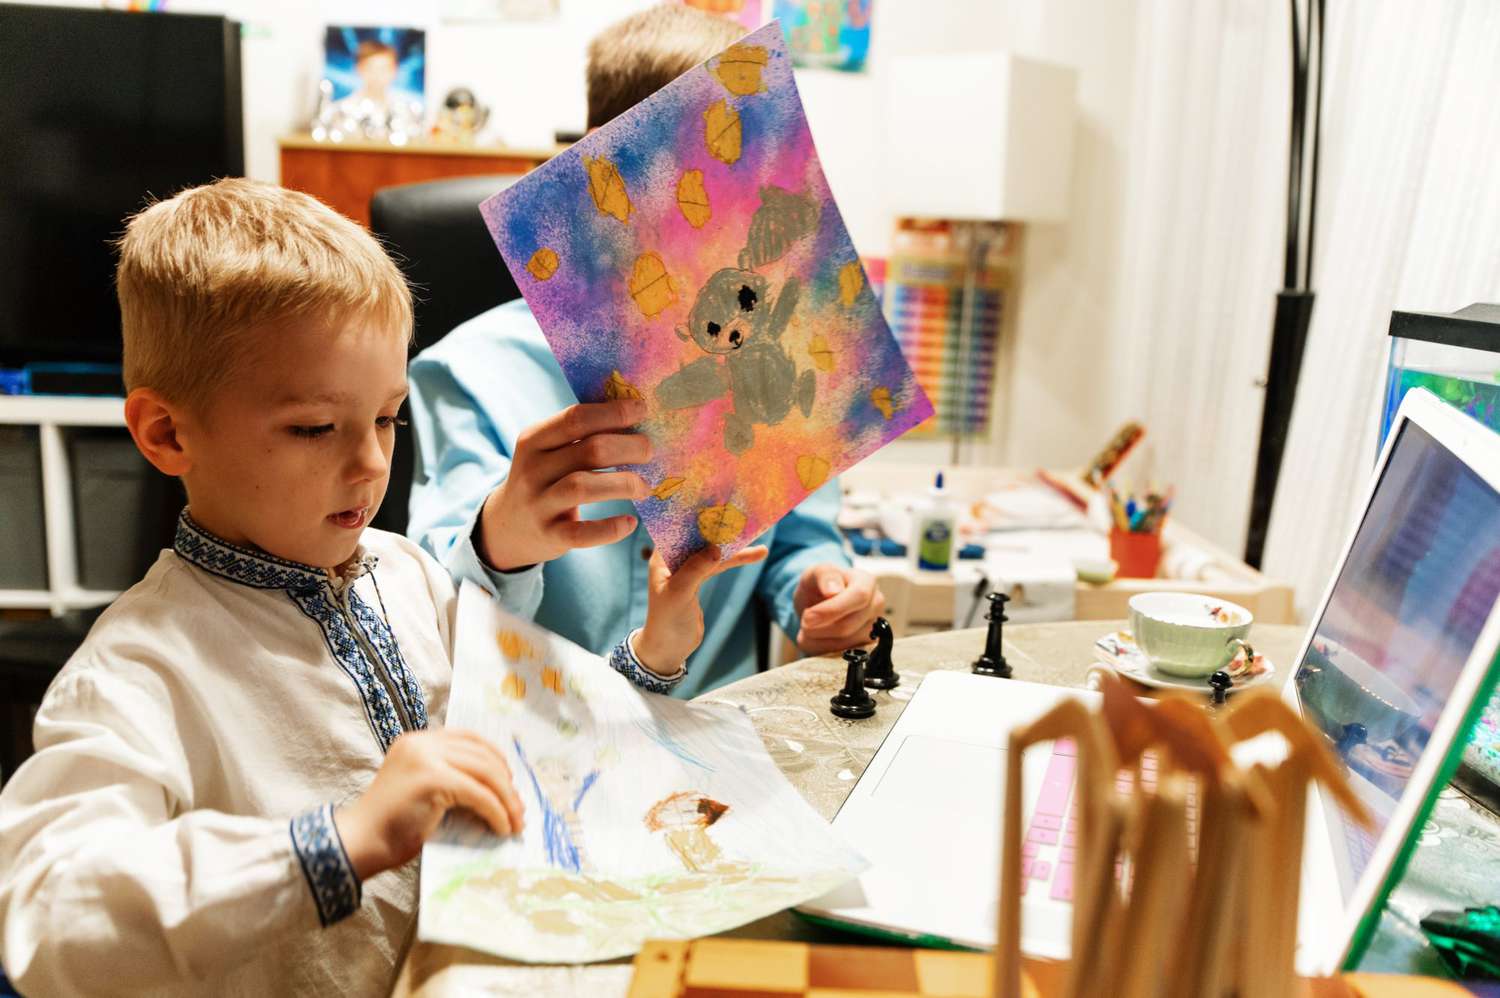 An image of Liana Popova's sons showing their artwork during a virtual meeting with Megan.